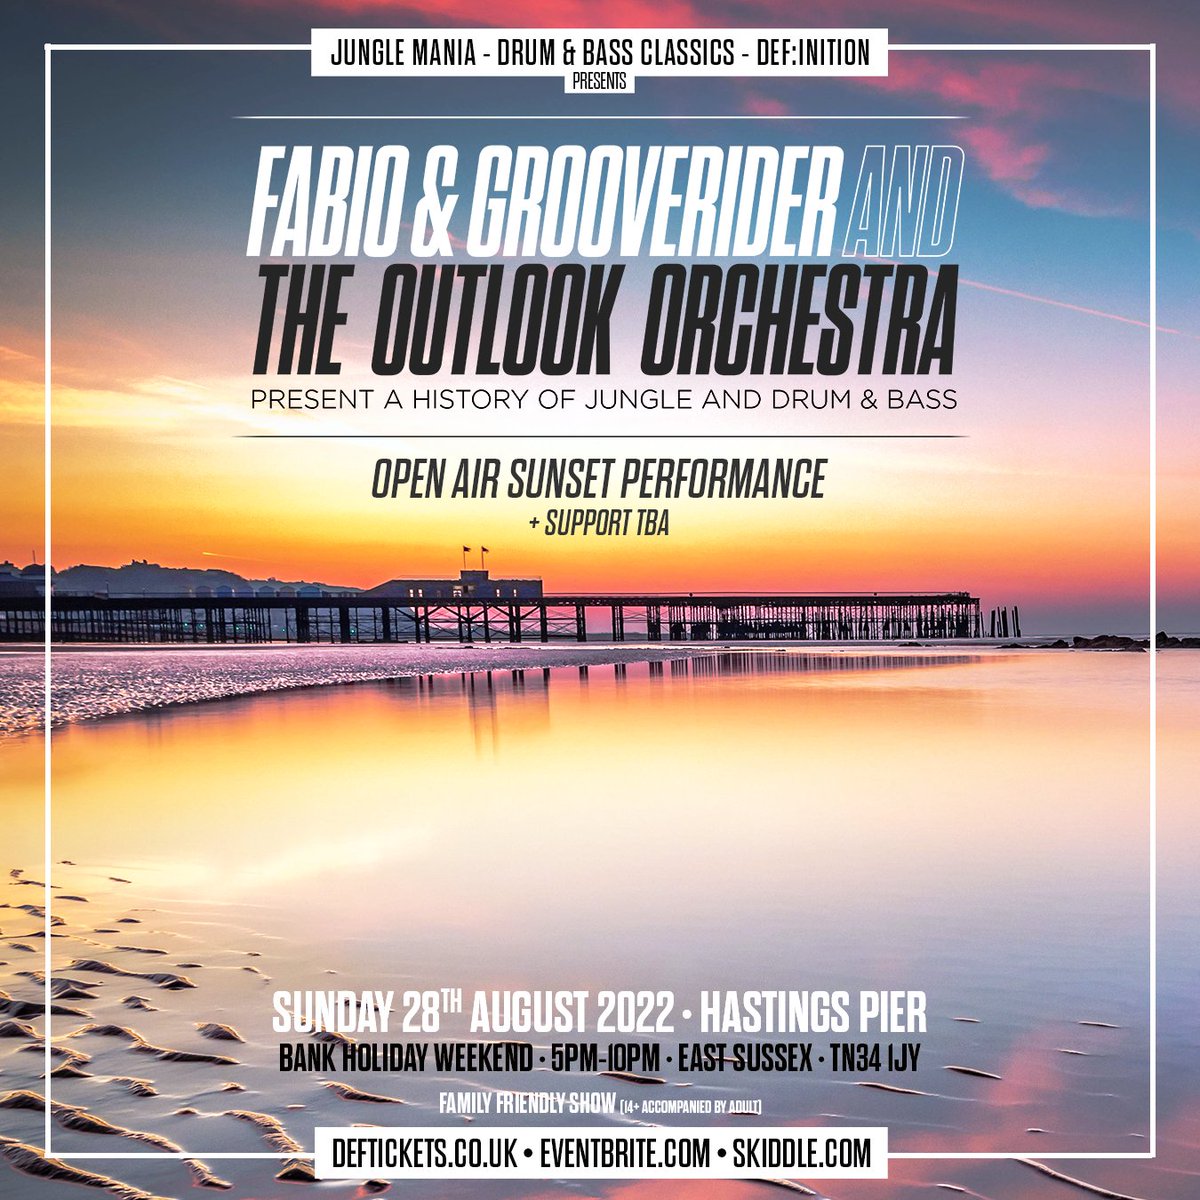 Really looking forward to this on August #BankHoliday #Weekend 🎺 @fabioandgroove and the #OutlookOrchestra celebrate a History of Jungle and D&B on #HastingsPier, feat some of the scenes most iconic and well loved tracks! 28.08.22 definitiondnb.com @fabiodnb @GROOVERIDERDJ